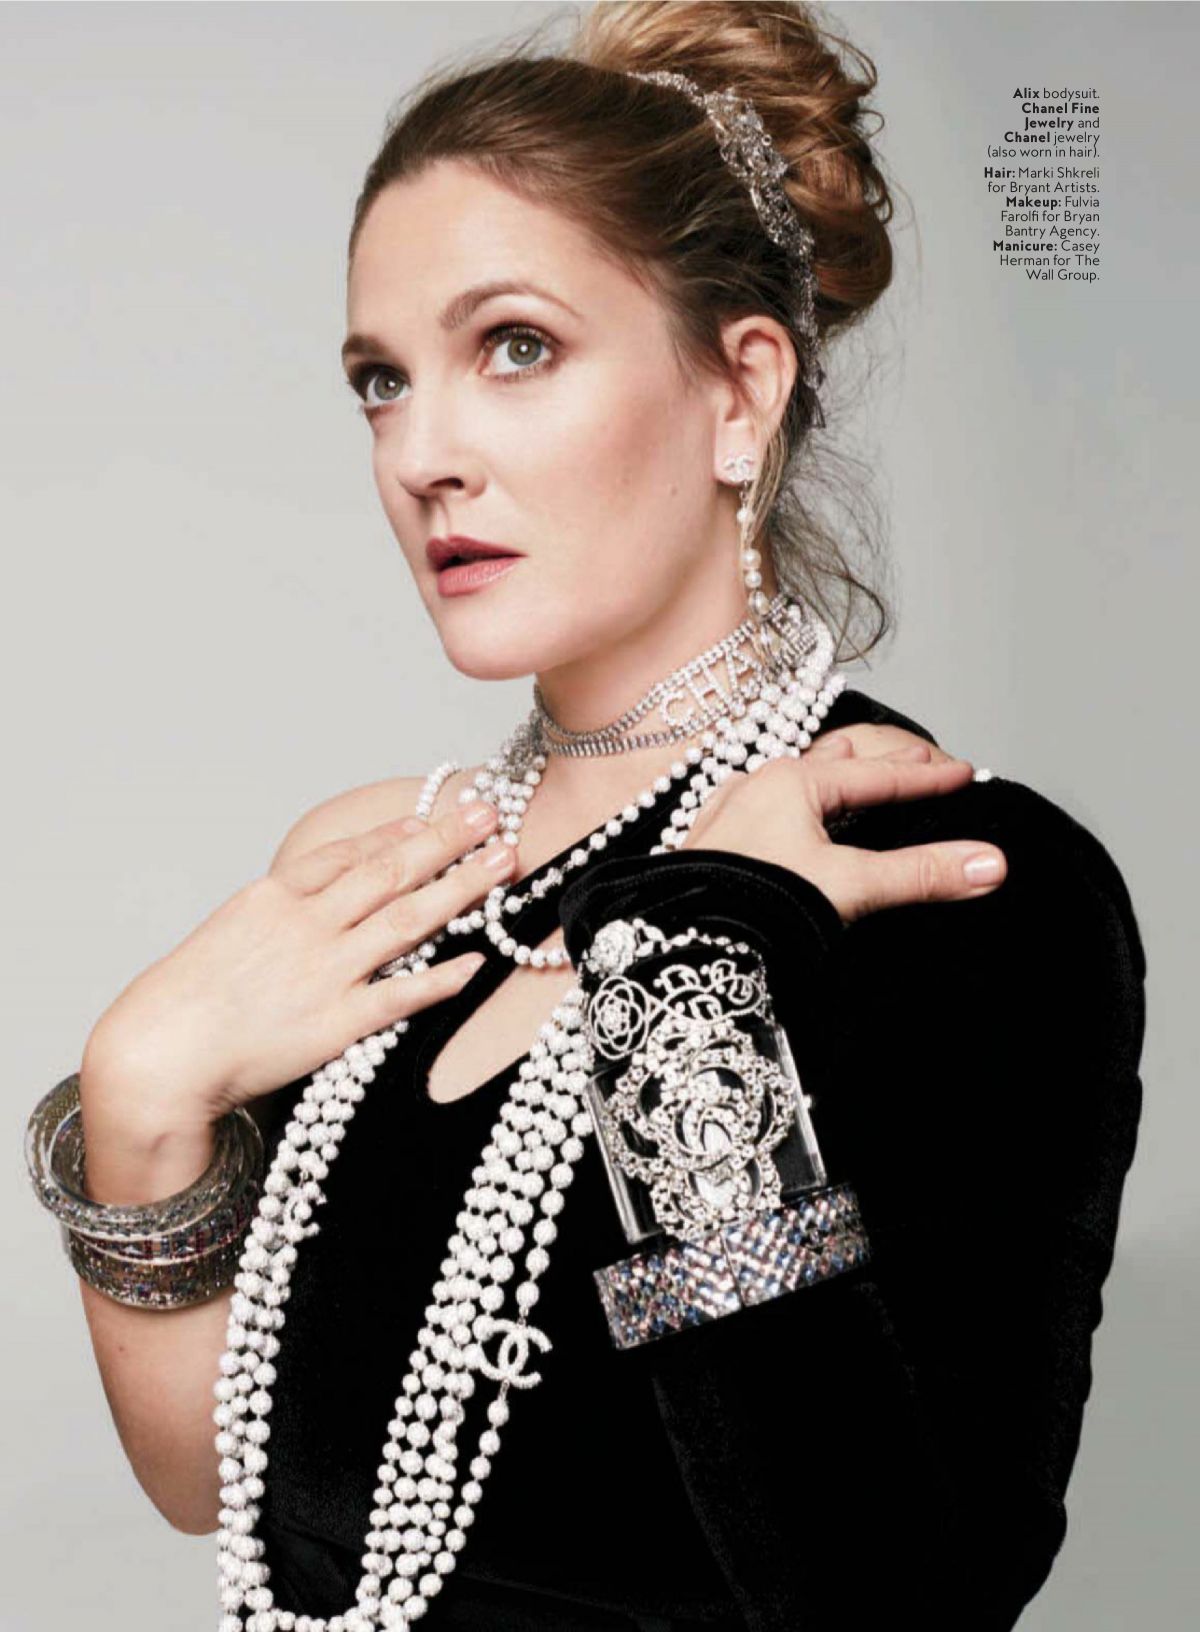 Drew Barrymore in Instyle Magazine, February 2018